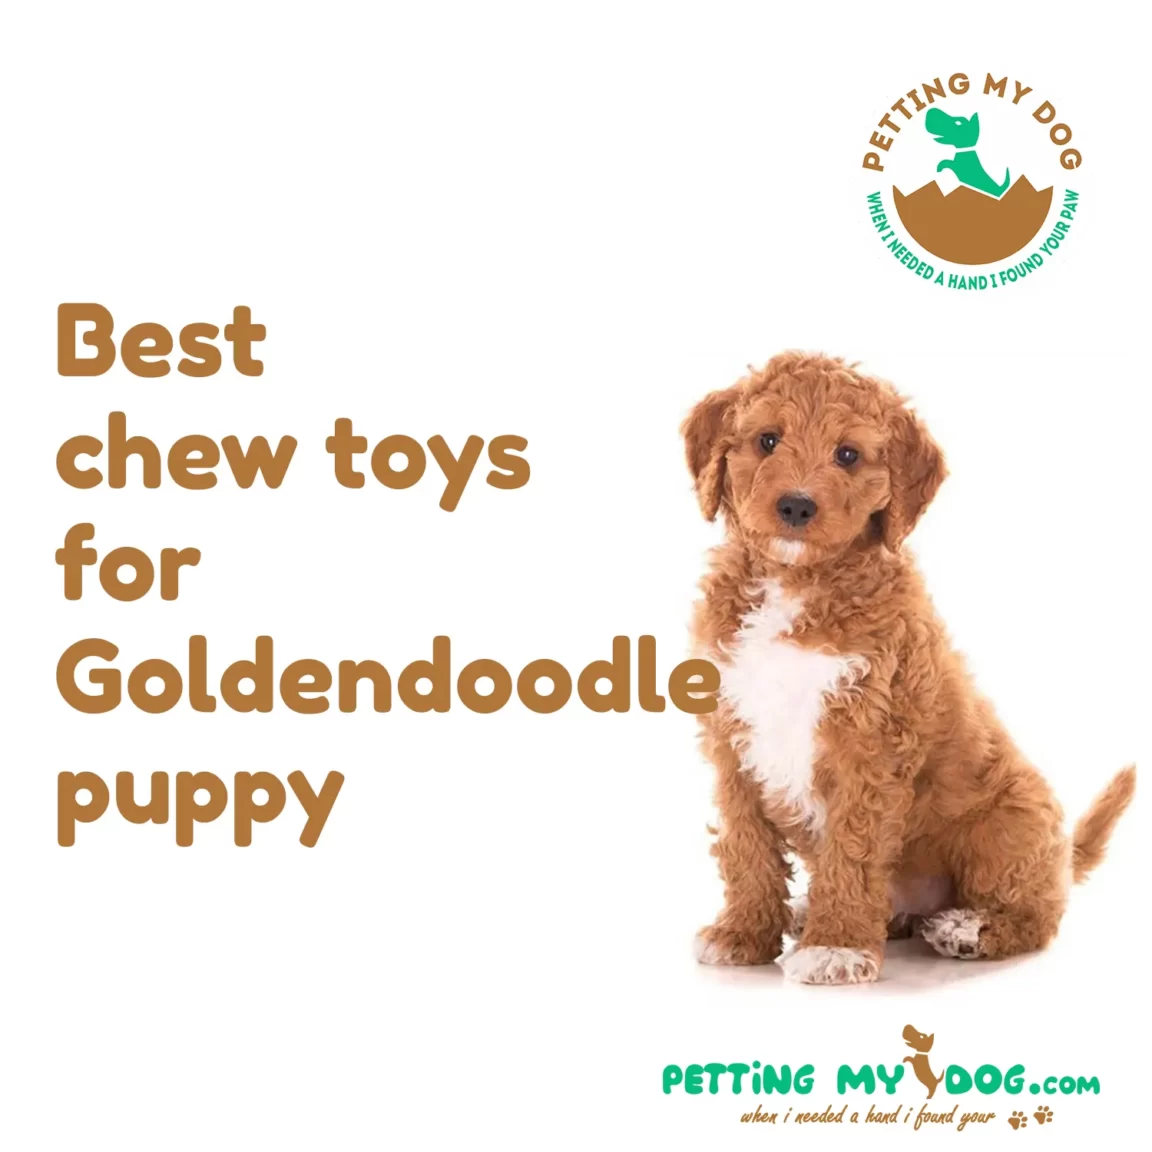 Best chew toys for Goldendoodle puppy